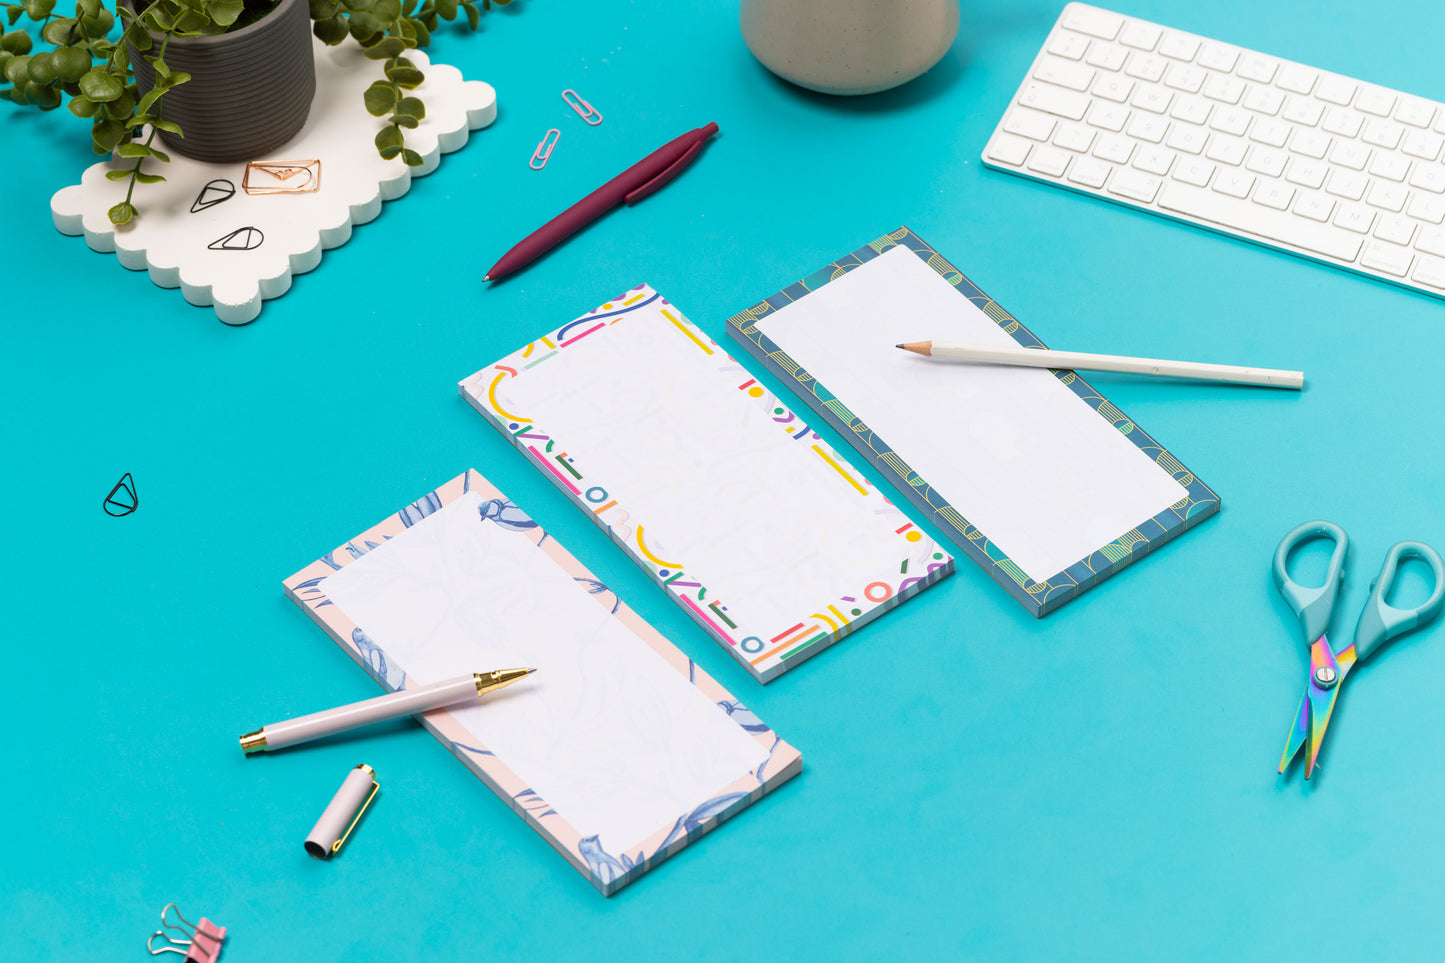 Three list pads - Brighton Birds, Cutouts and Deco Delights - are in a row on a teal desk, with a white pen and pencil leaning on them, with a white keyboard and paperclips around them.